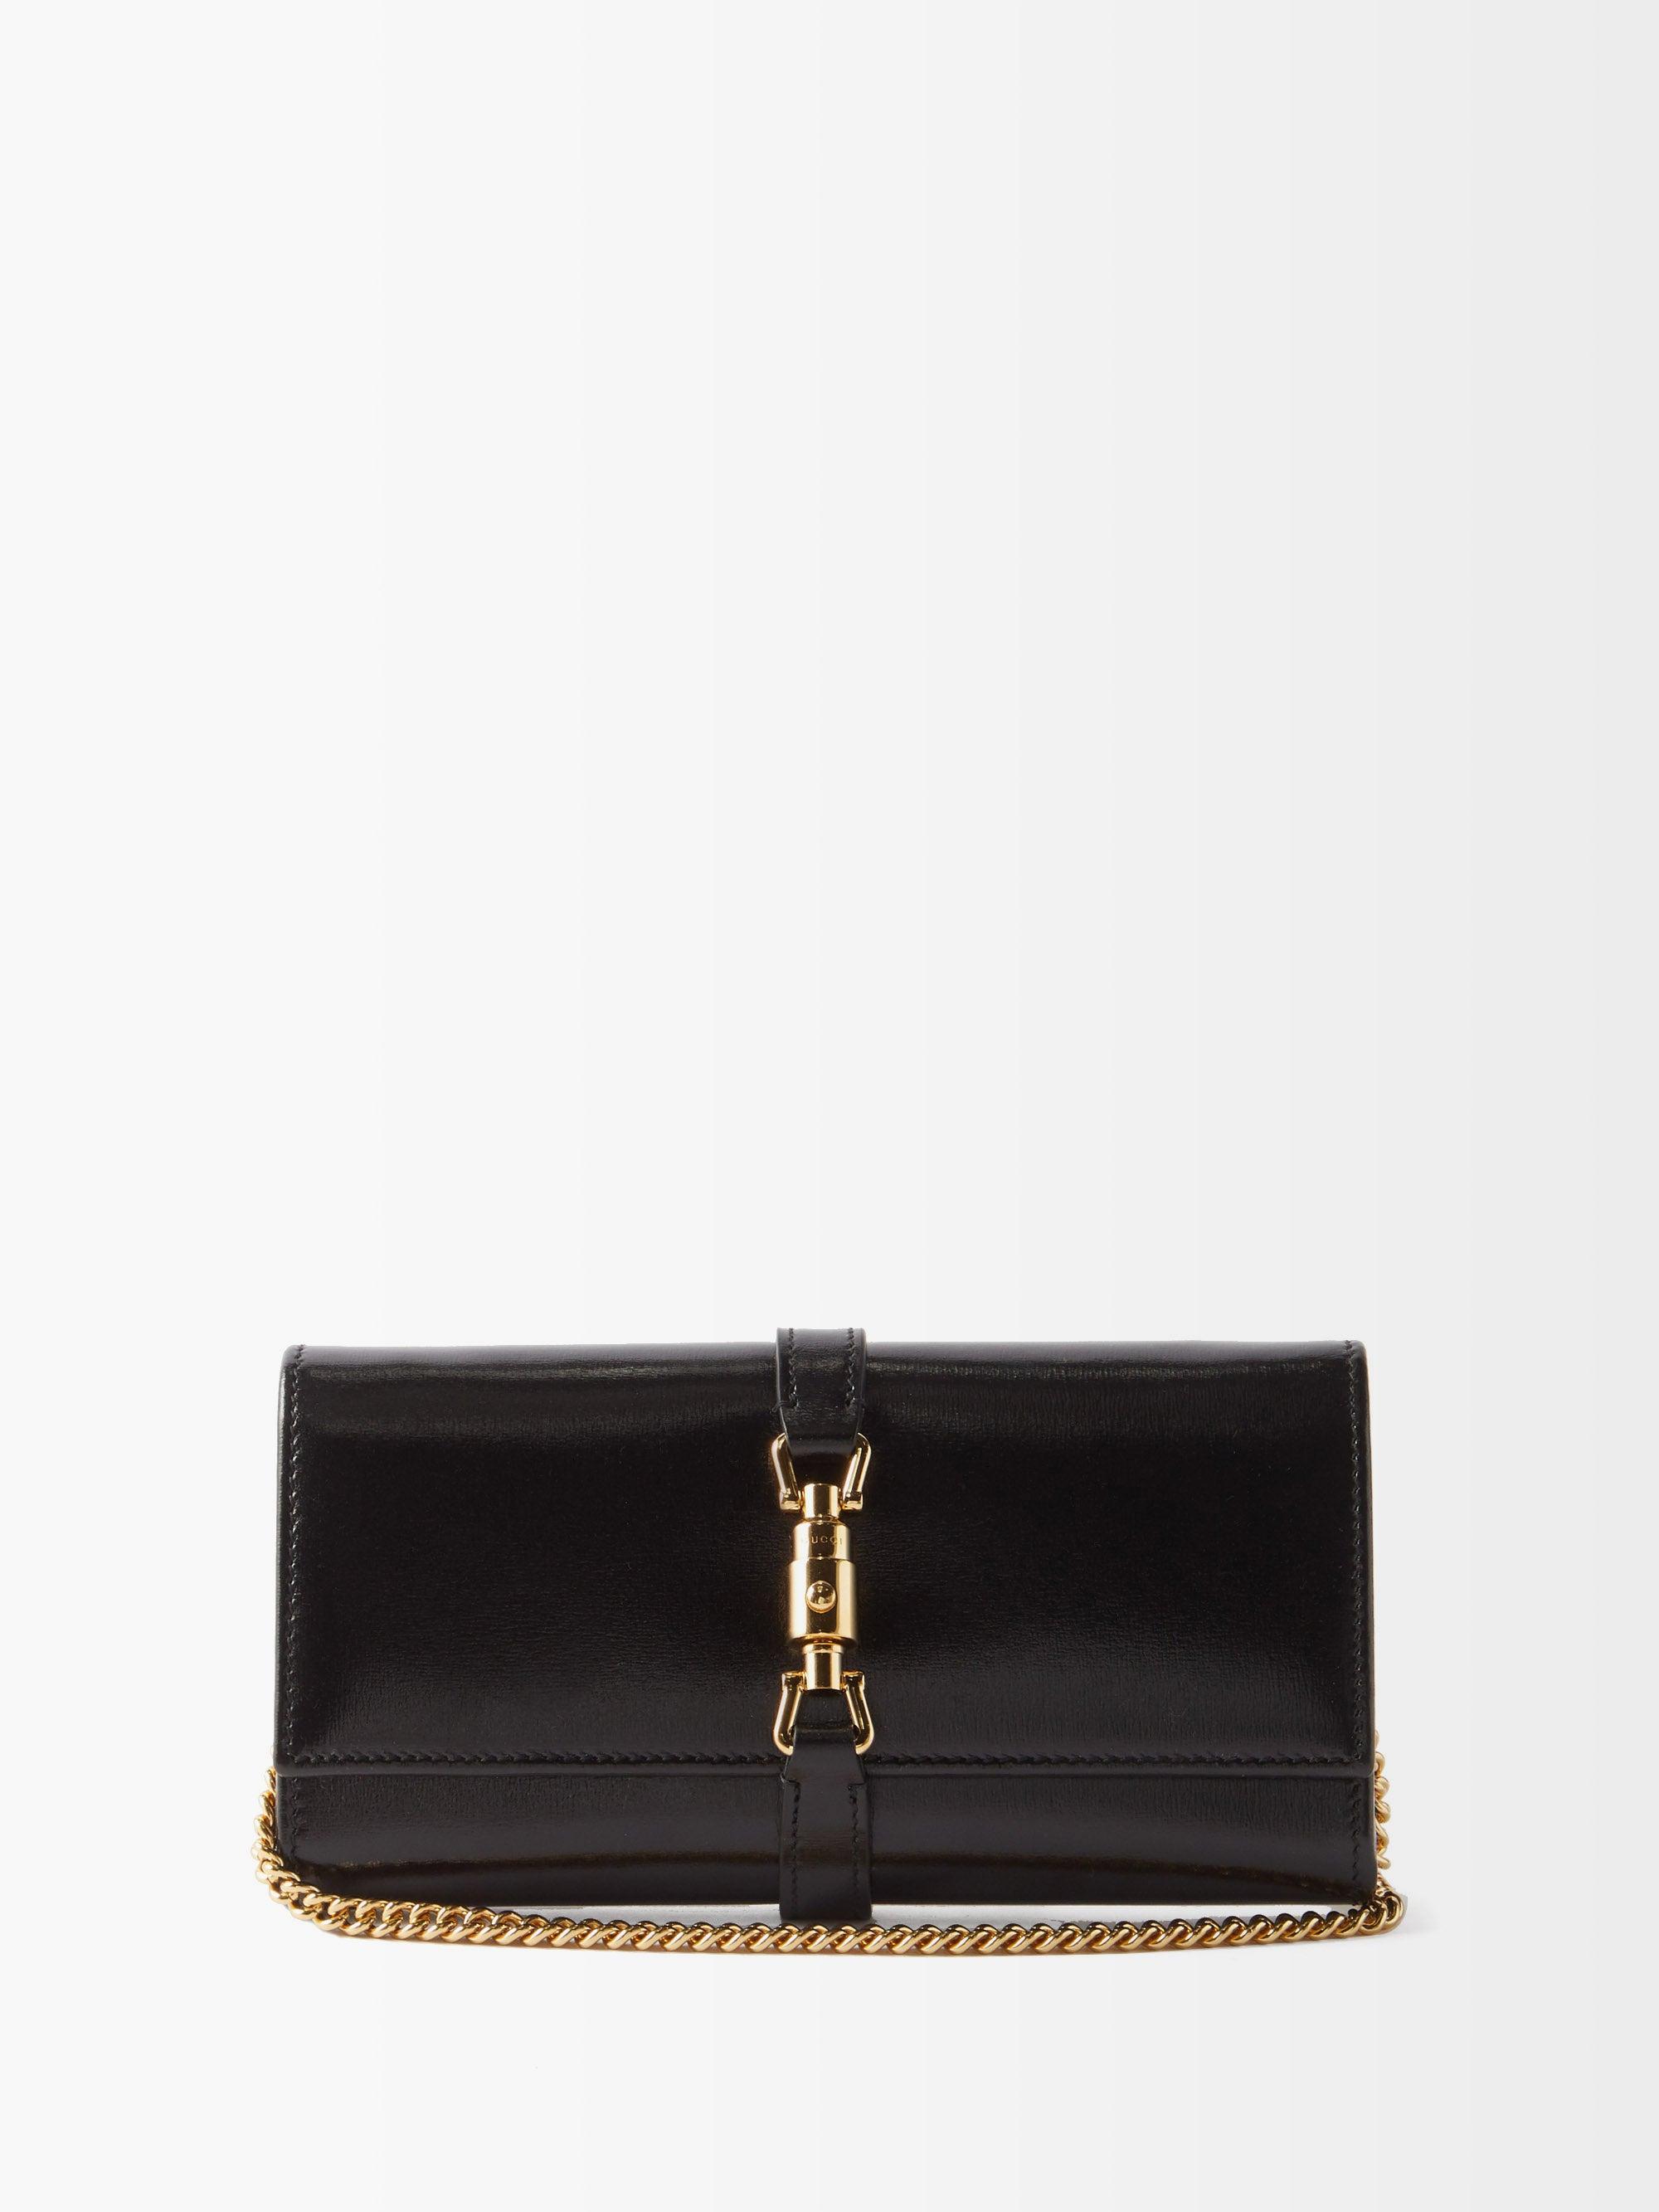 Gucci Jackie 1961 Leather Wallet Cross-body Bag in Black | Lyst